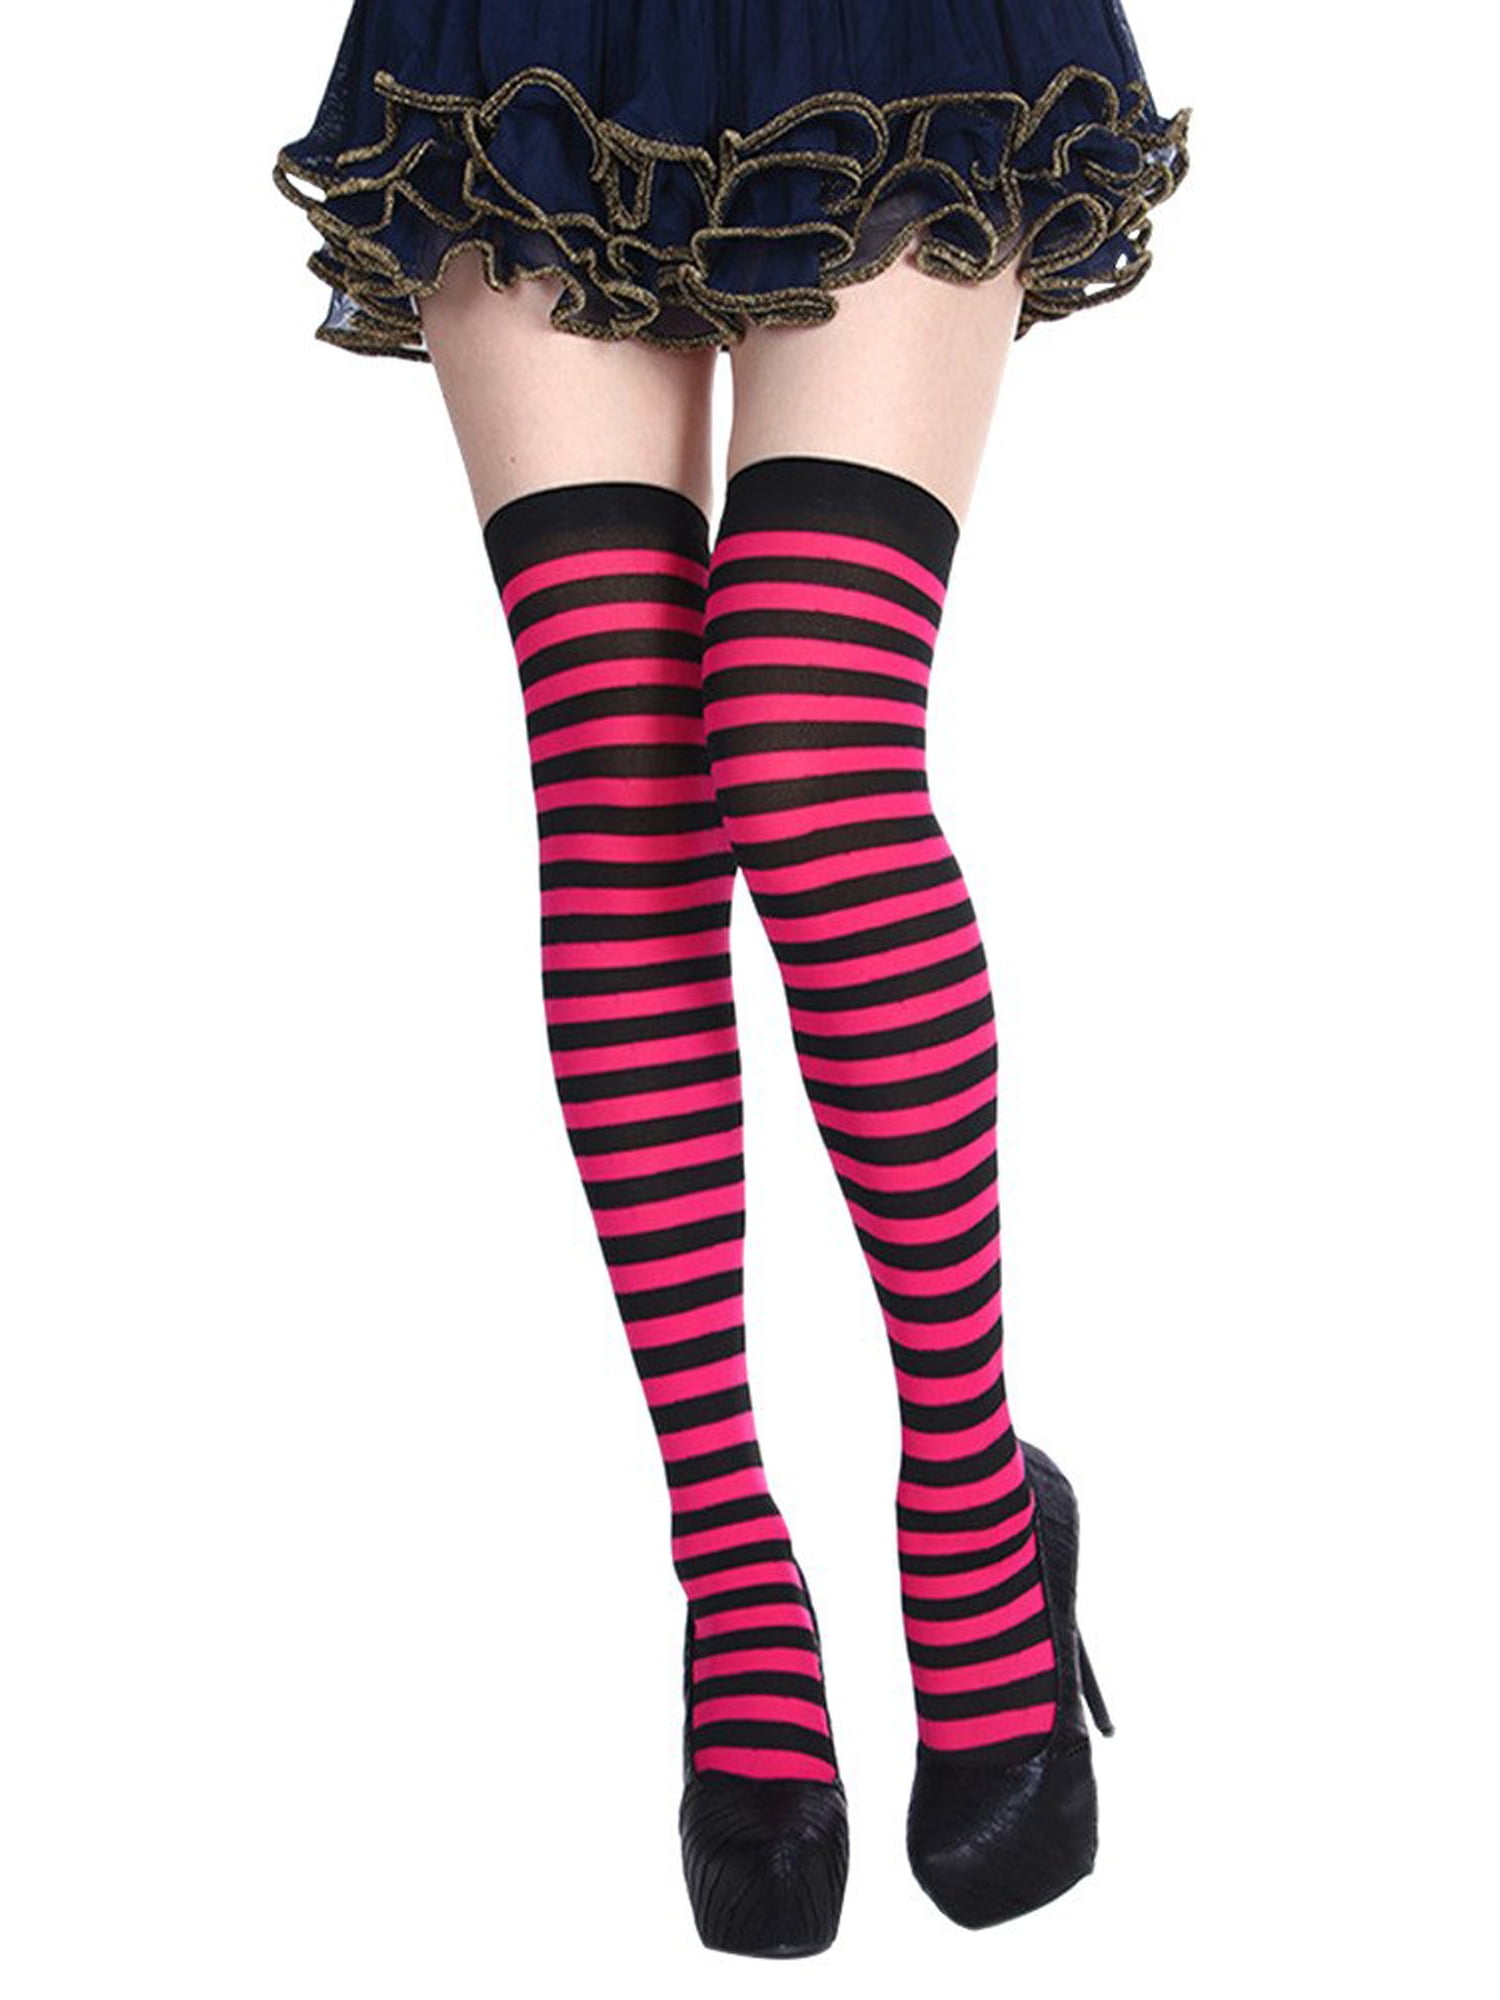 Angelique Womens Striped Nylon Thigh High Stockings Hosiery Costume Tights